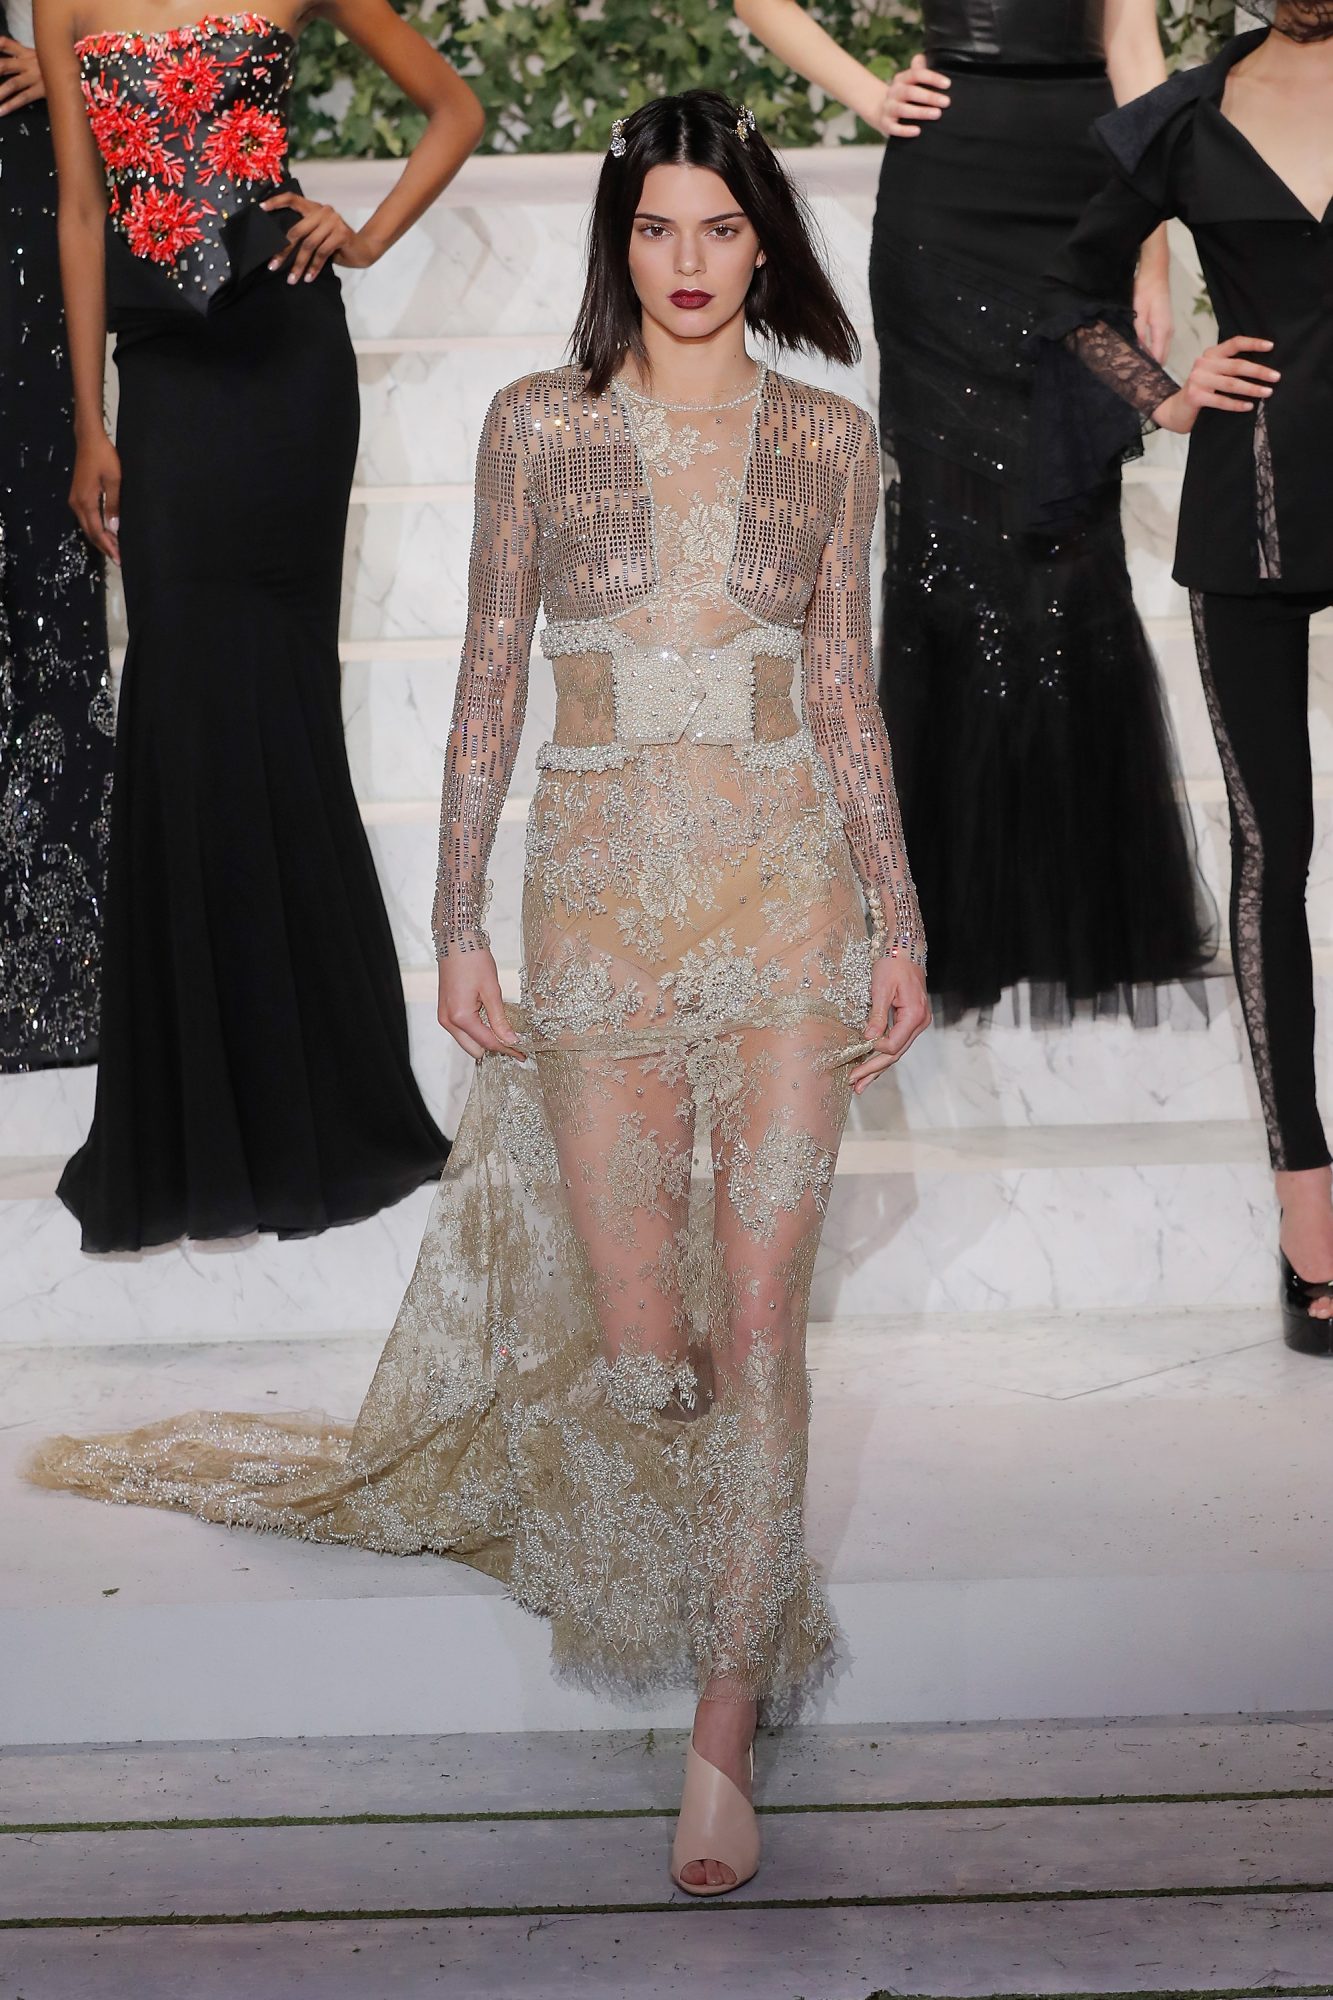 Kendall Jenner Nearly Bares It All in Stylish Sheer Dress: Photos